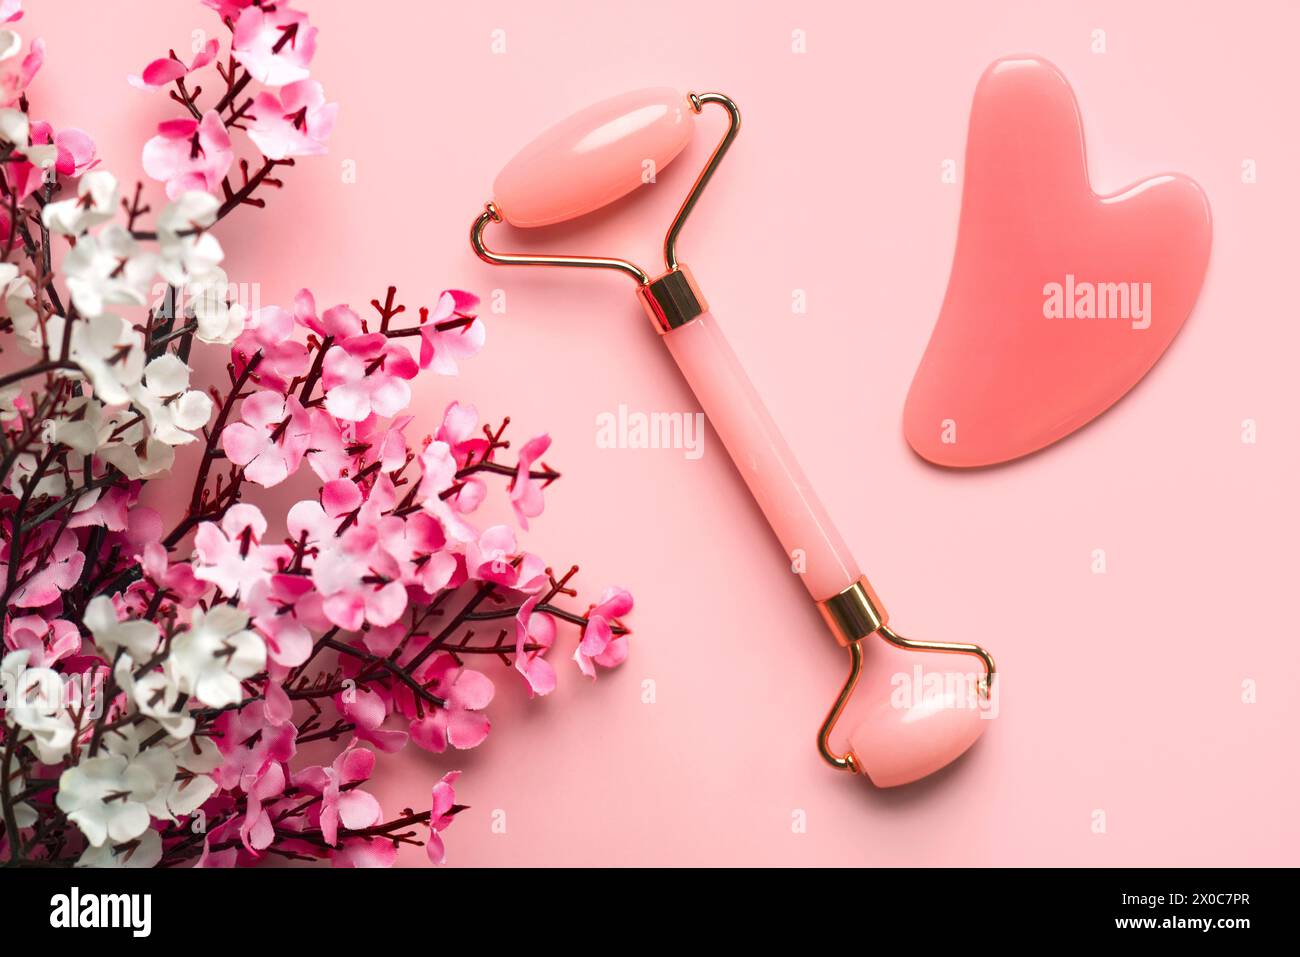 Closeup of pink jade roller, jade gua sha massager stone and almond blossoms against a pink background. Skin care products concept Stock Photo